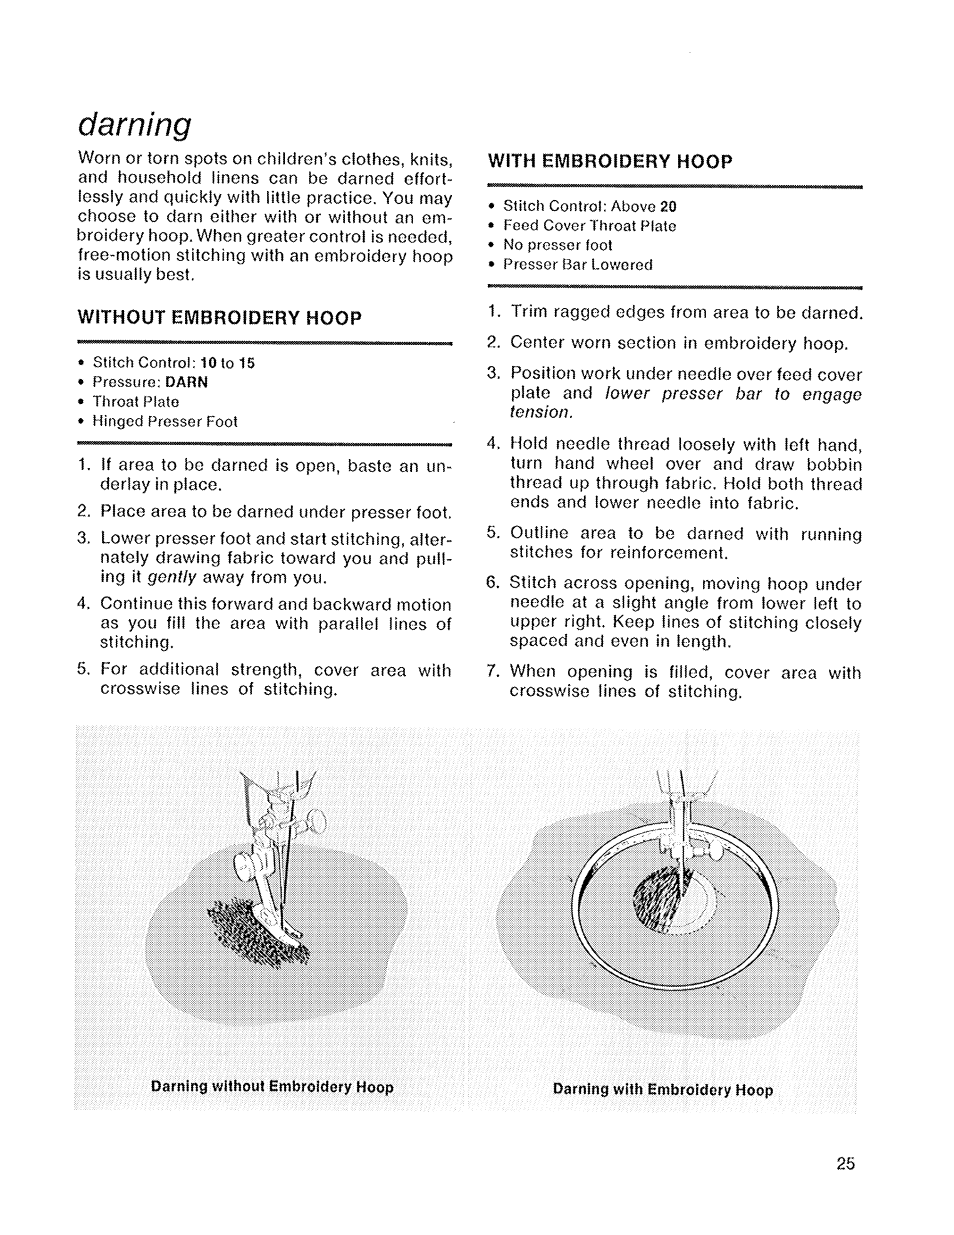 Darning, Without embroidery hoop, With embroidery hoop | SINGER 719 User Manual | Page 27 / 36